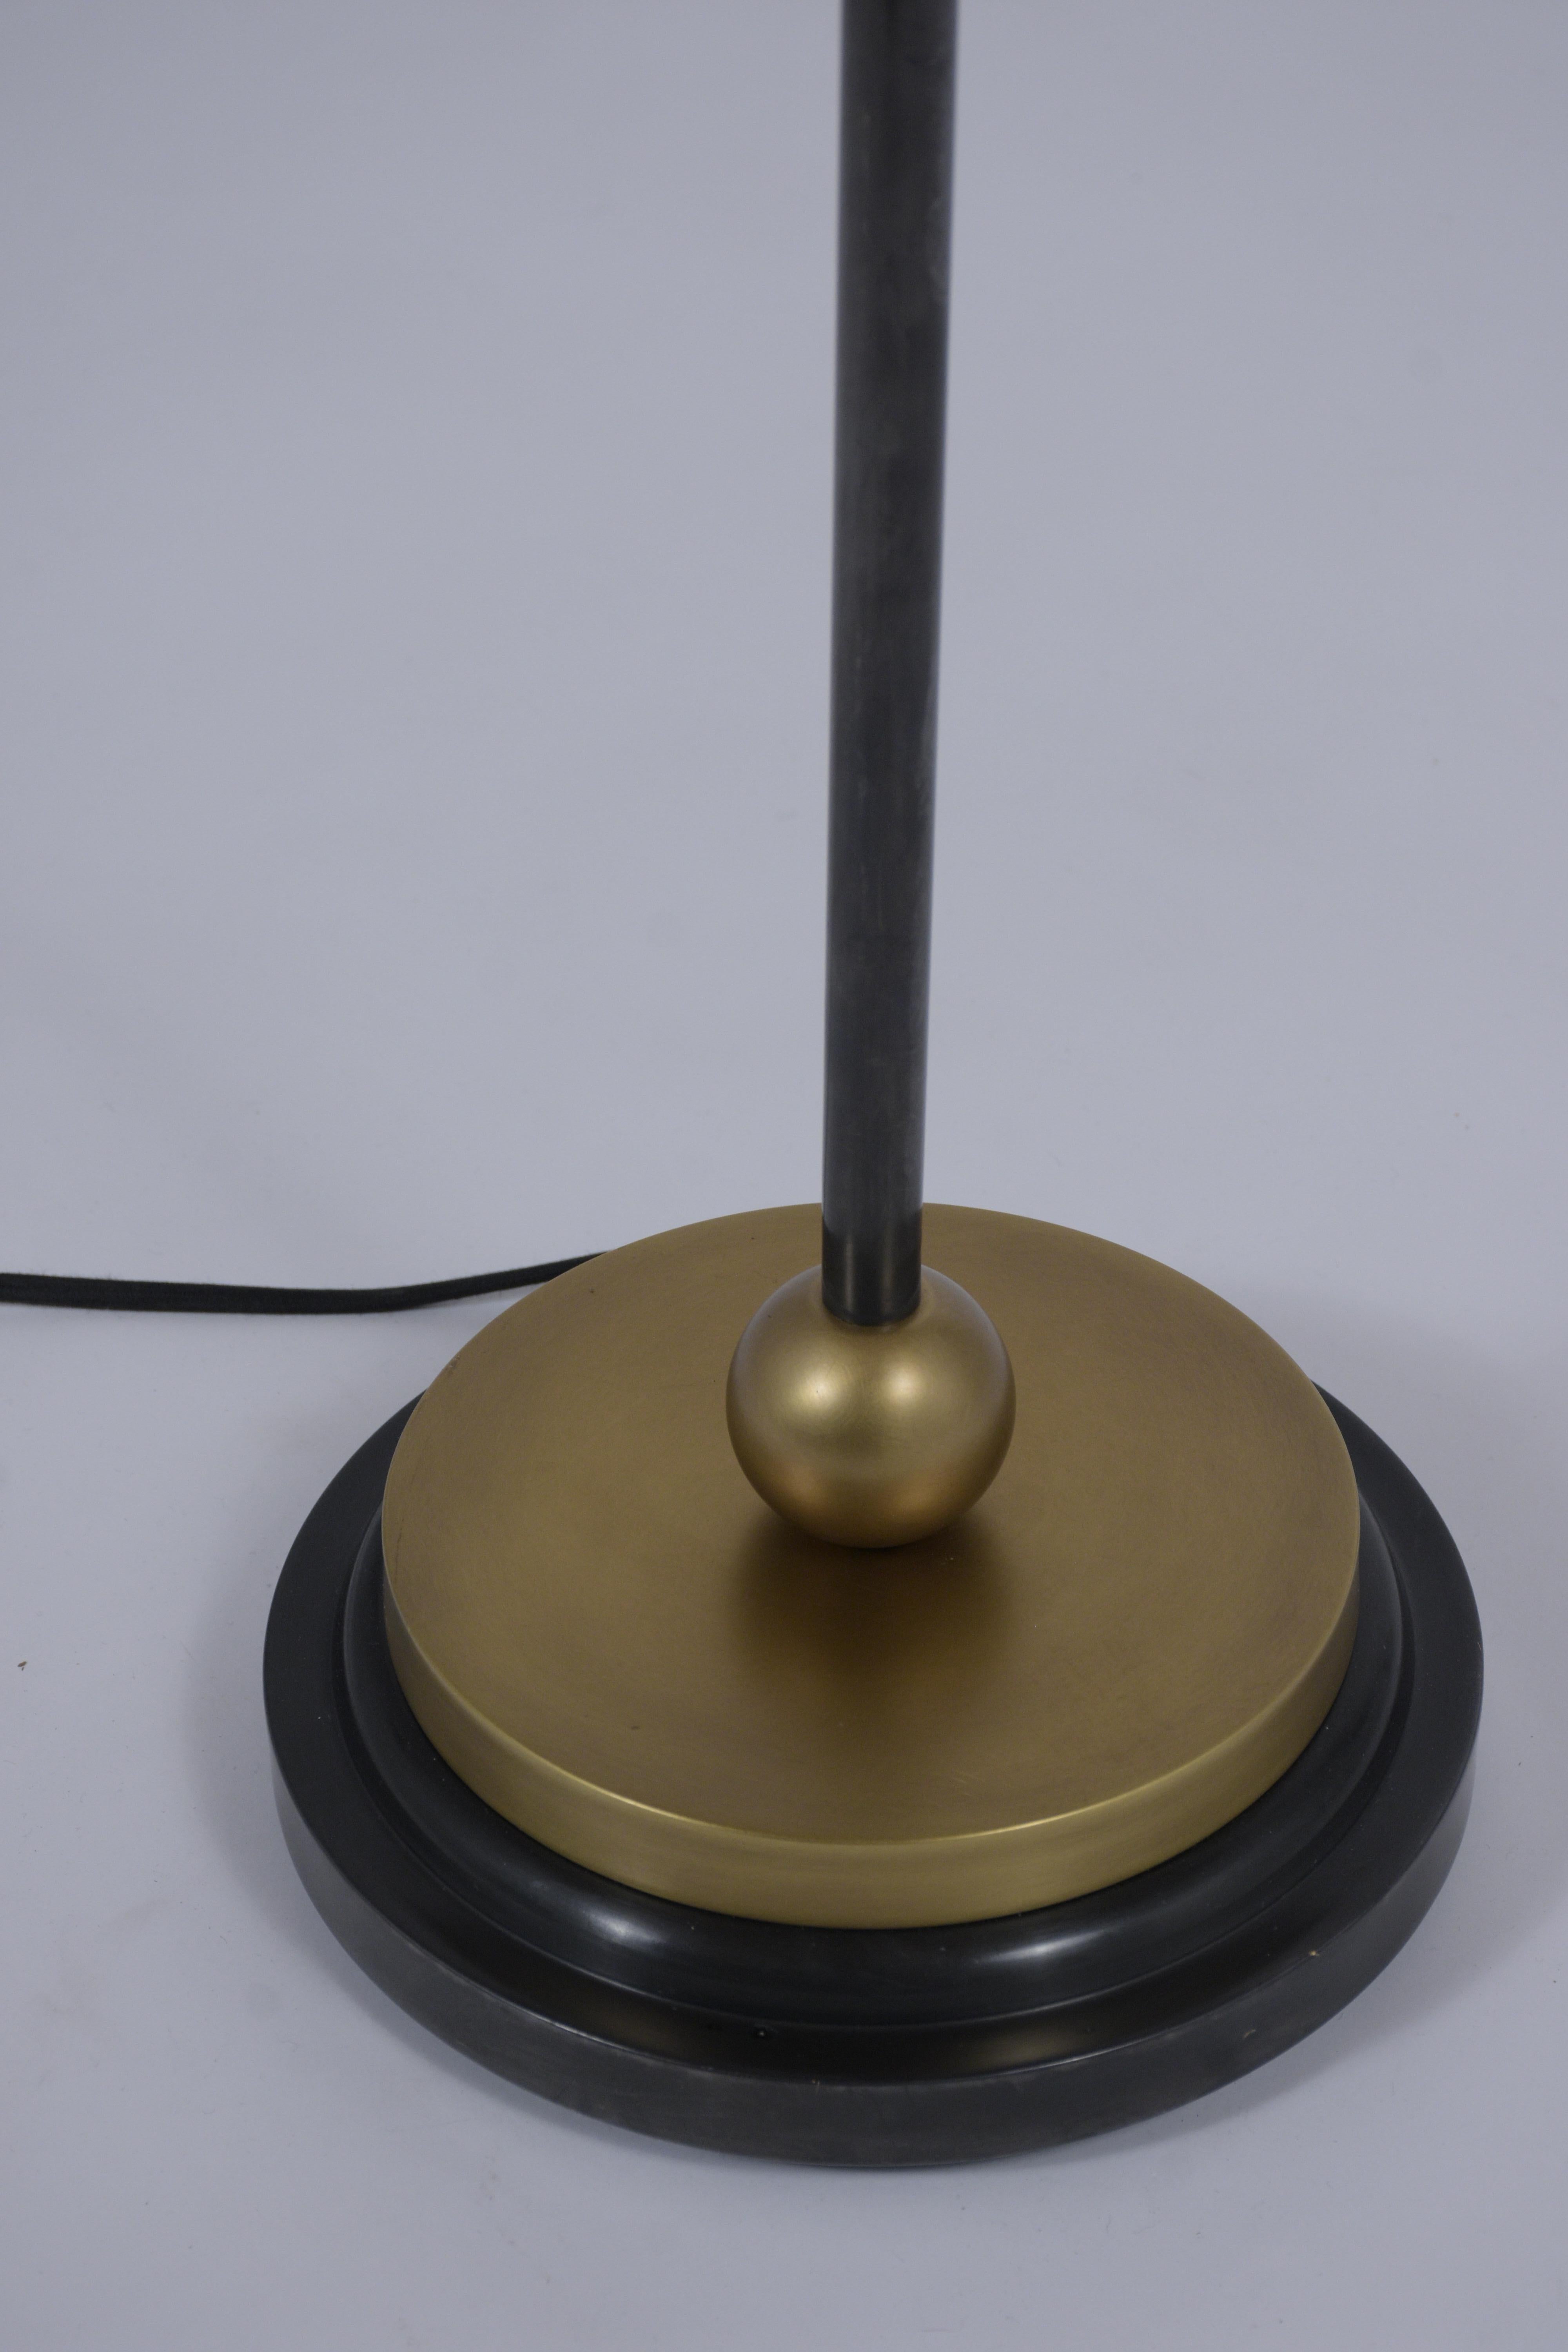 Experience the elegance of this Mid-Century Modern brass floor lamp, which is not only in prime working condition but also a testament to timeless design. Crafted from premium brass, its standout features include a swiveling brass shade and a